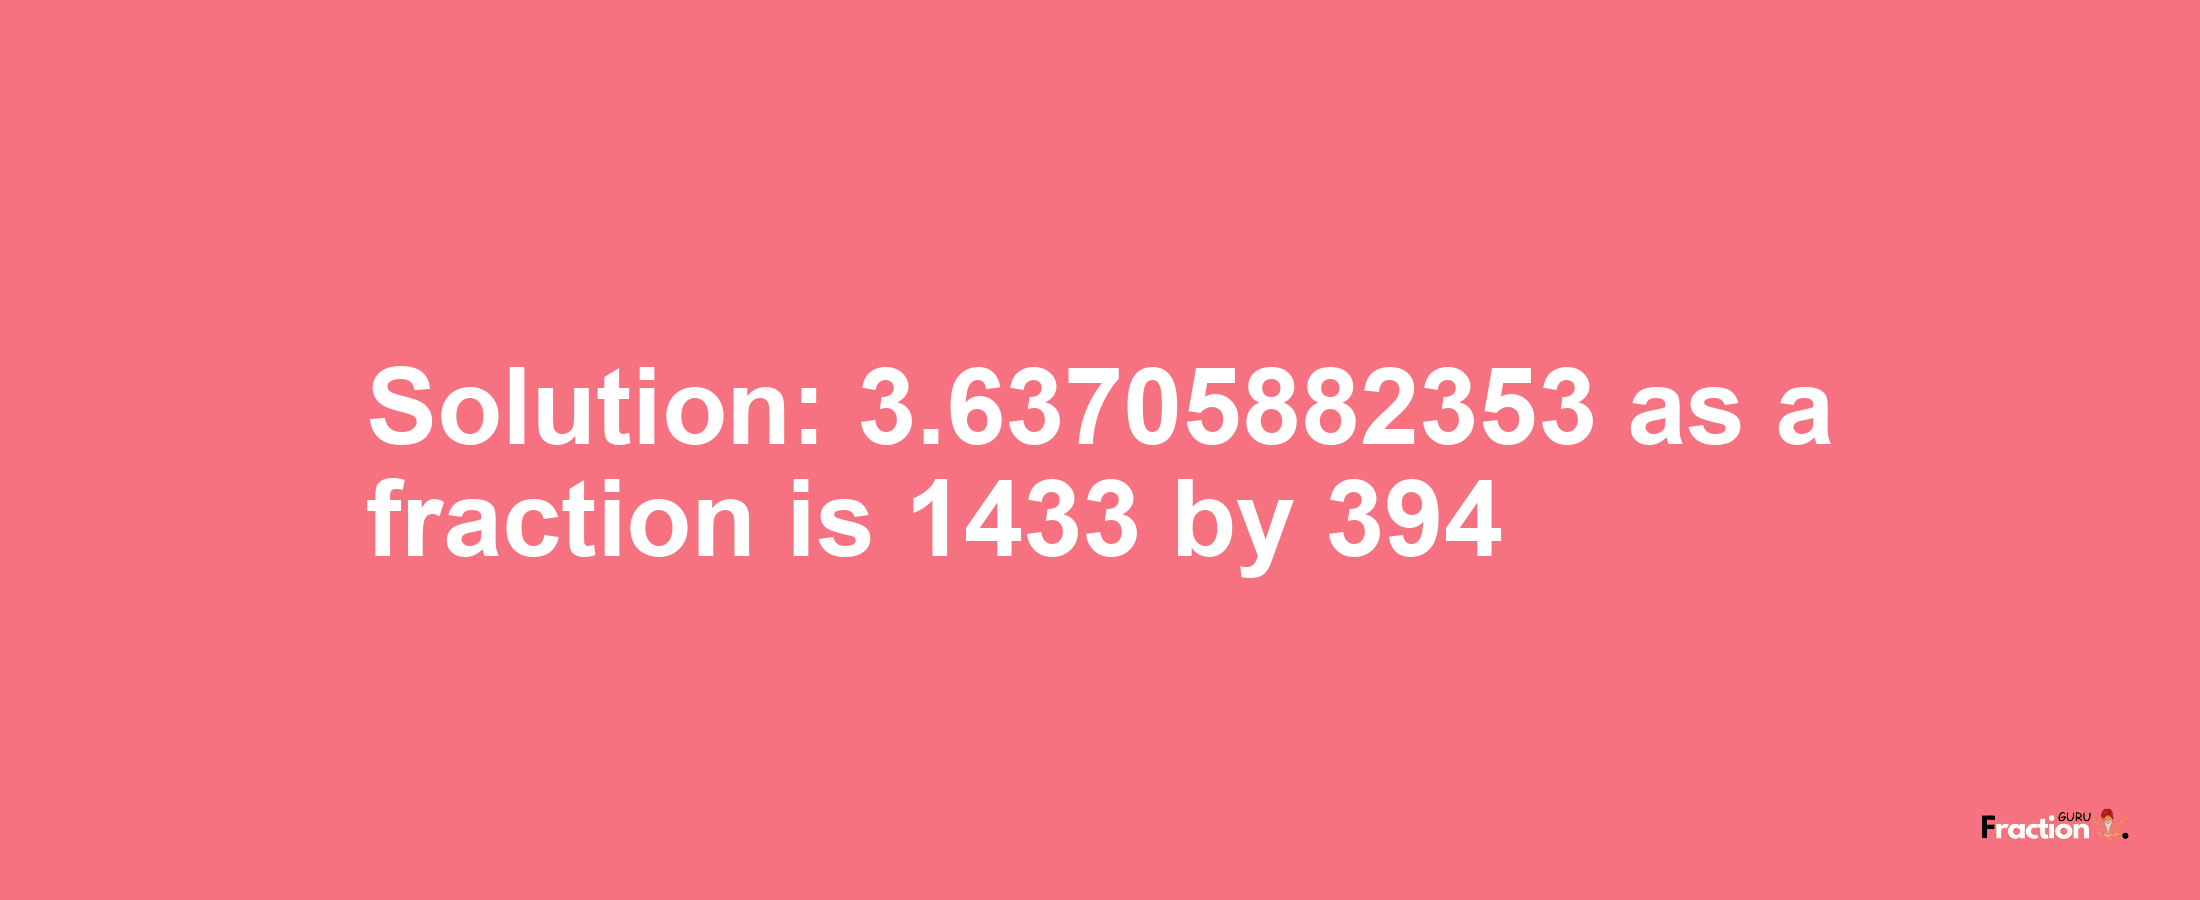 Solution:3.63705882353 as a fraction is 1433/394